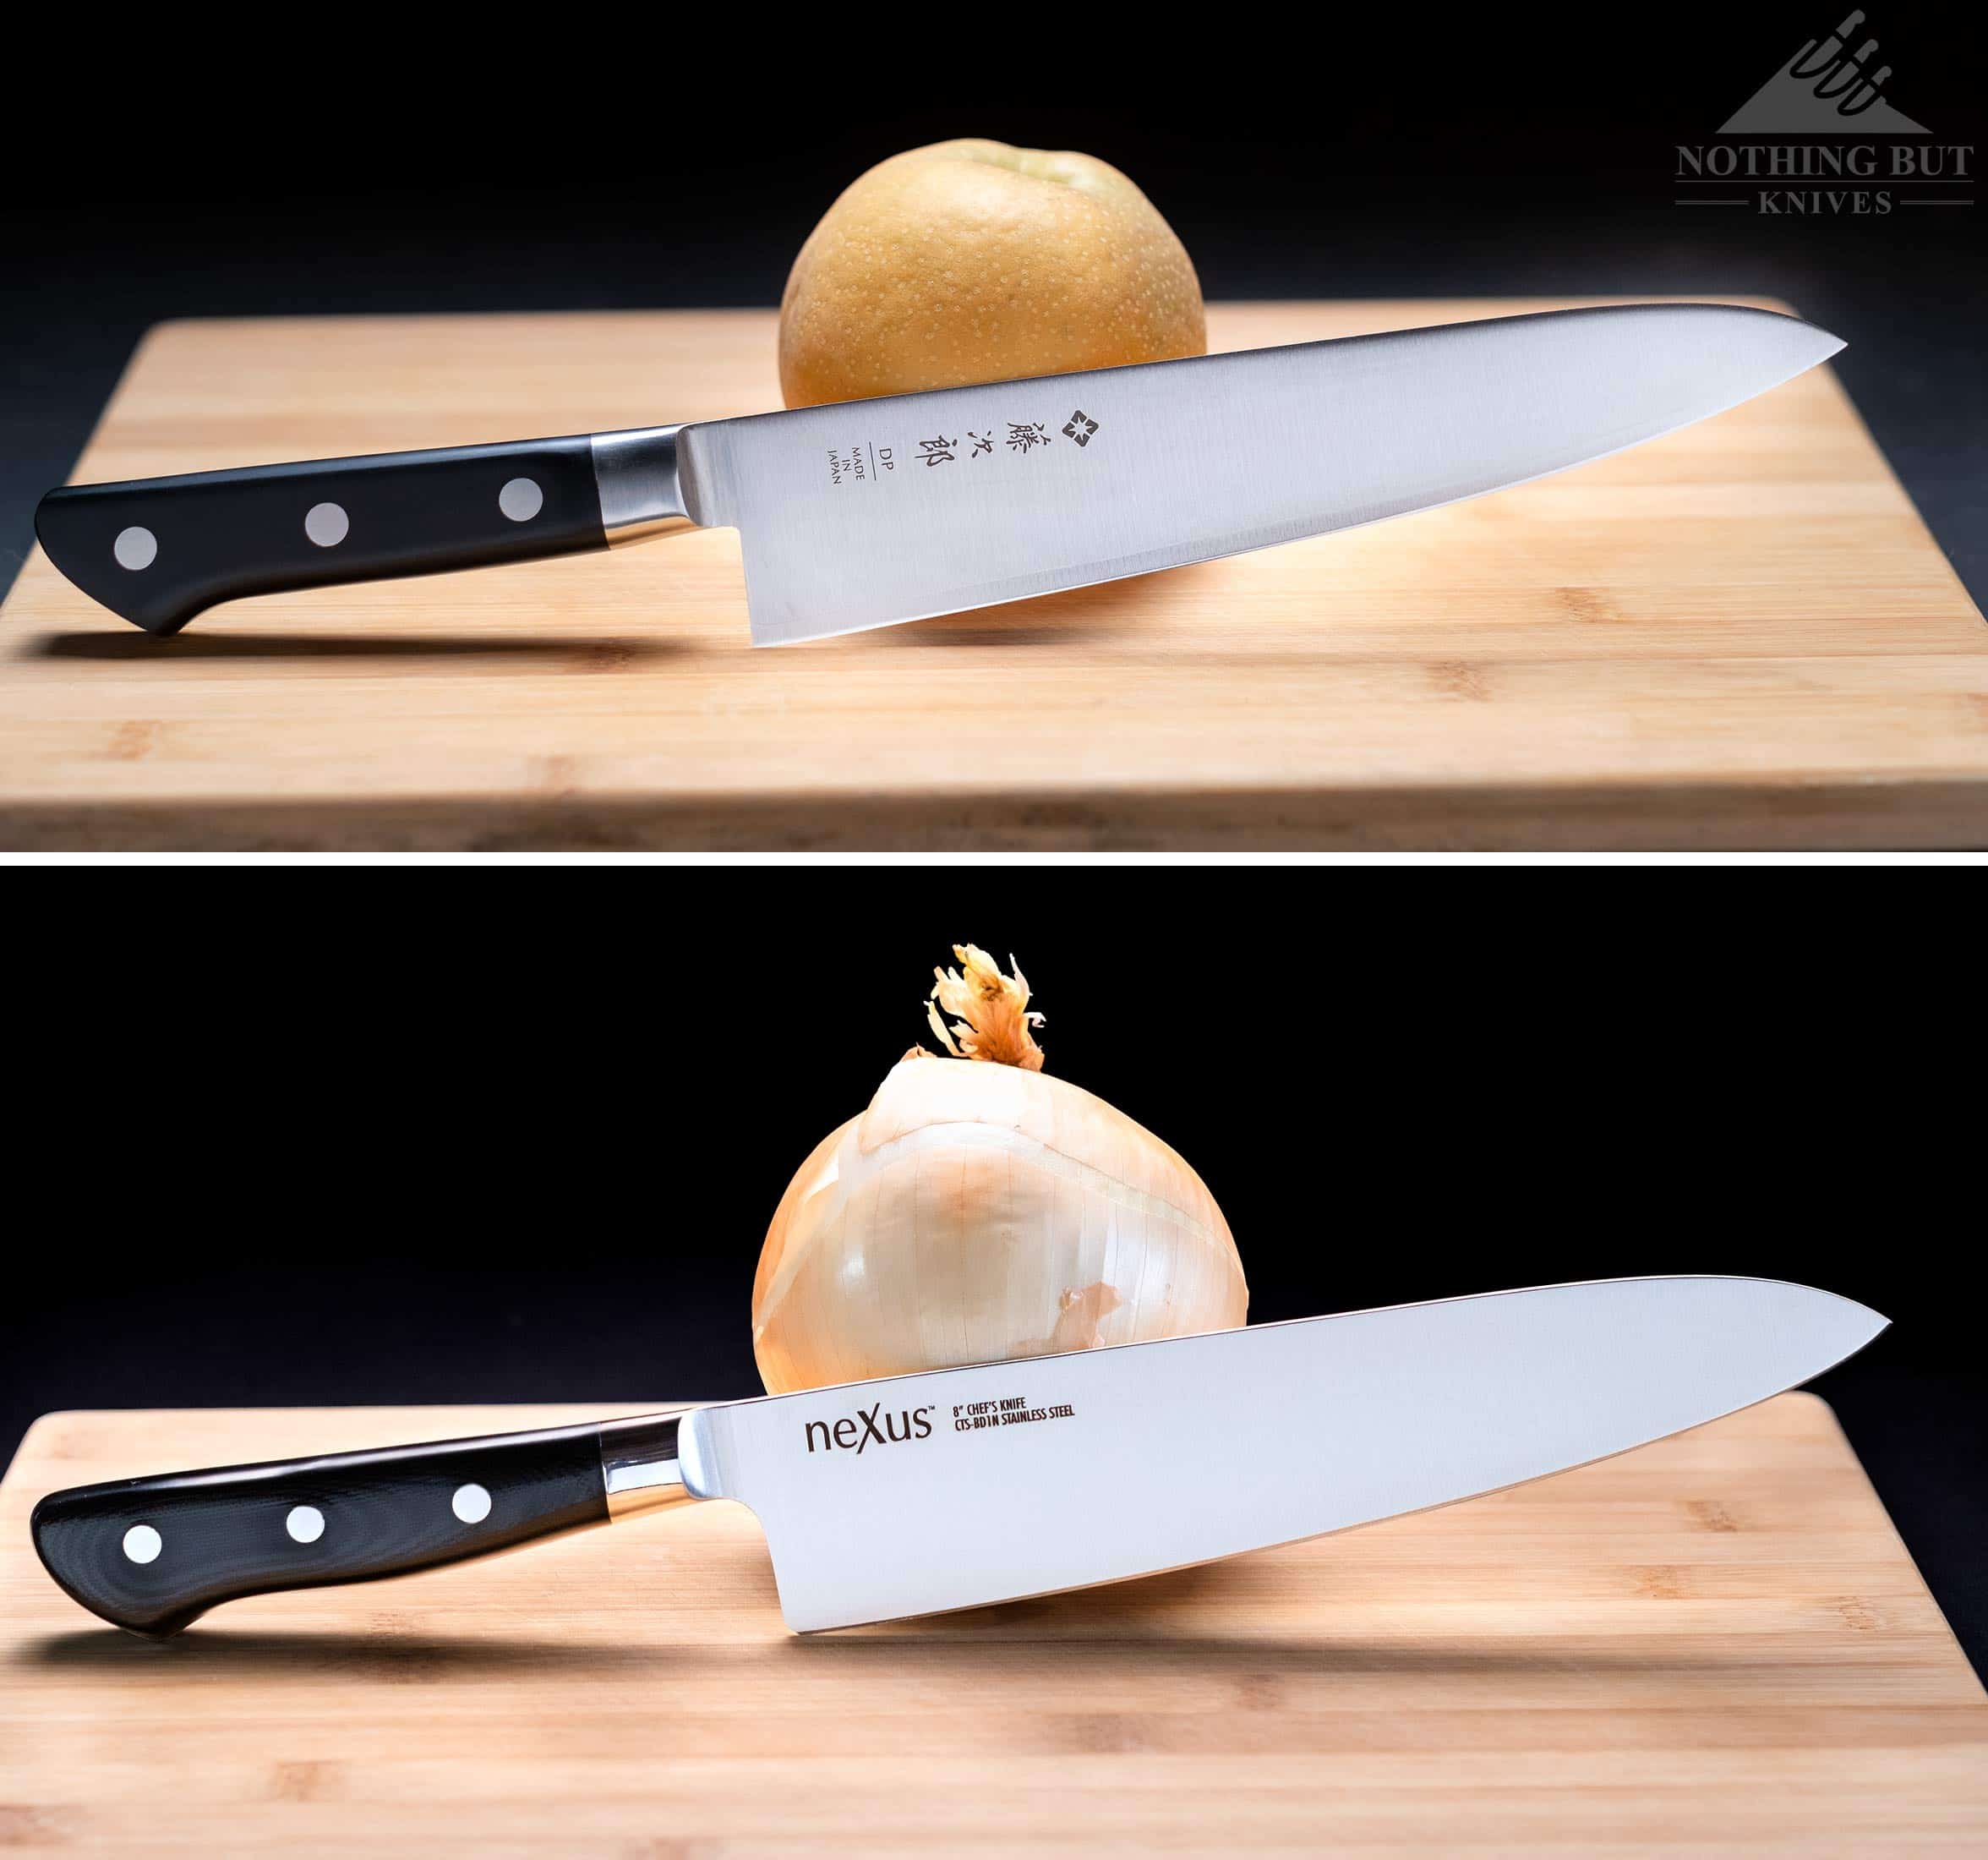 This image show two alternatives to the misen chef knife. The Tojiro DP is on top and the Nexus is on bottom. 